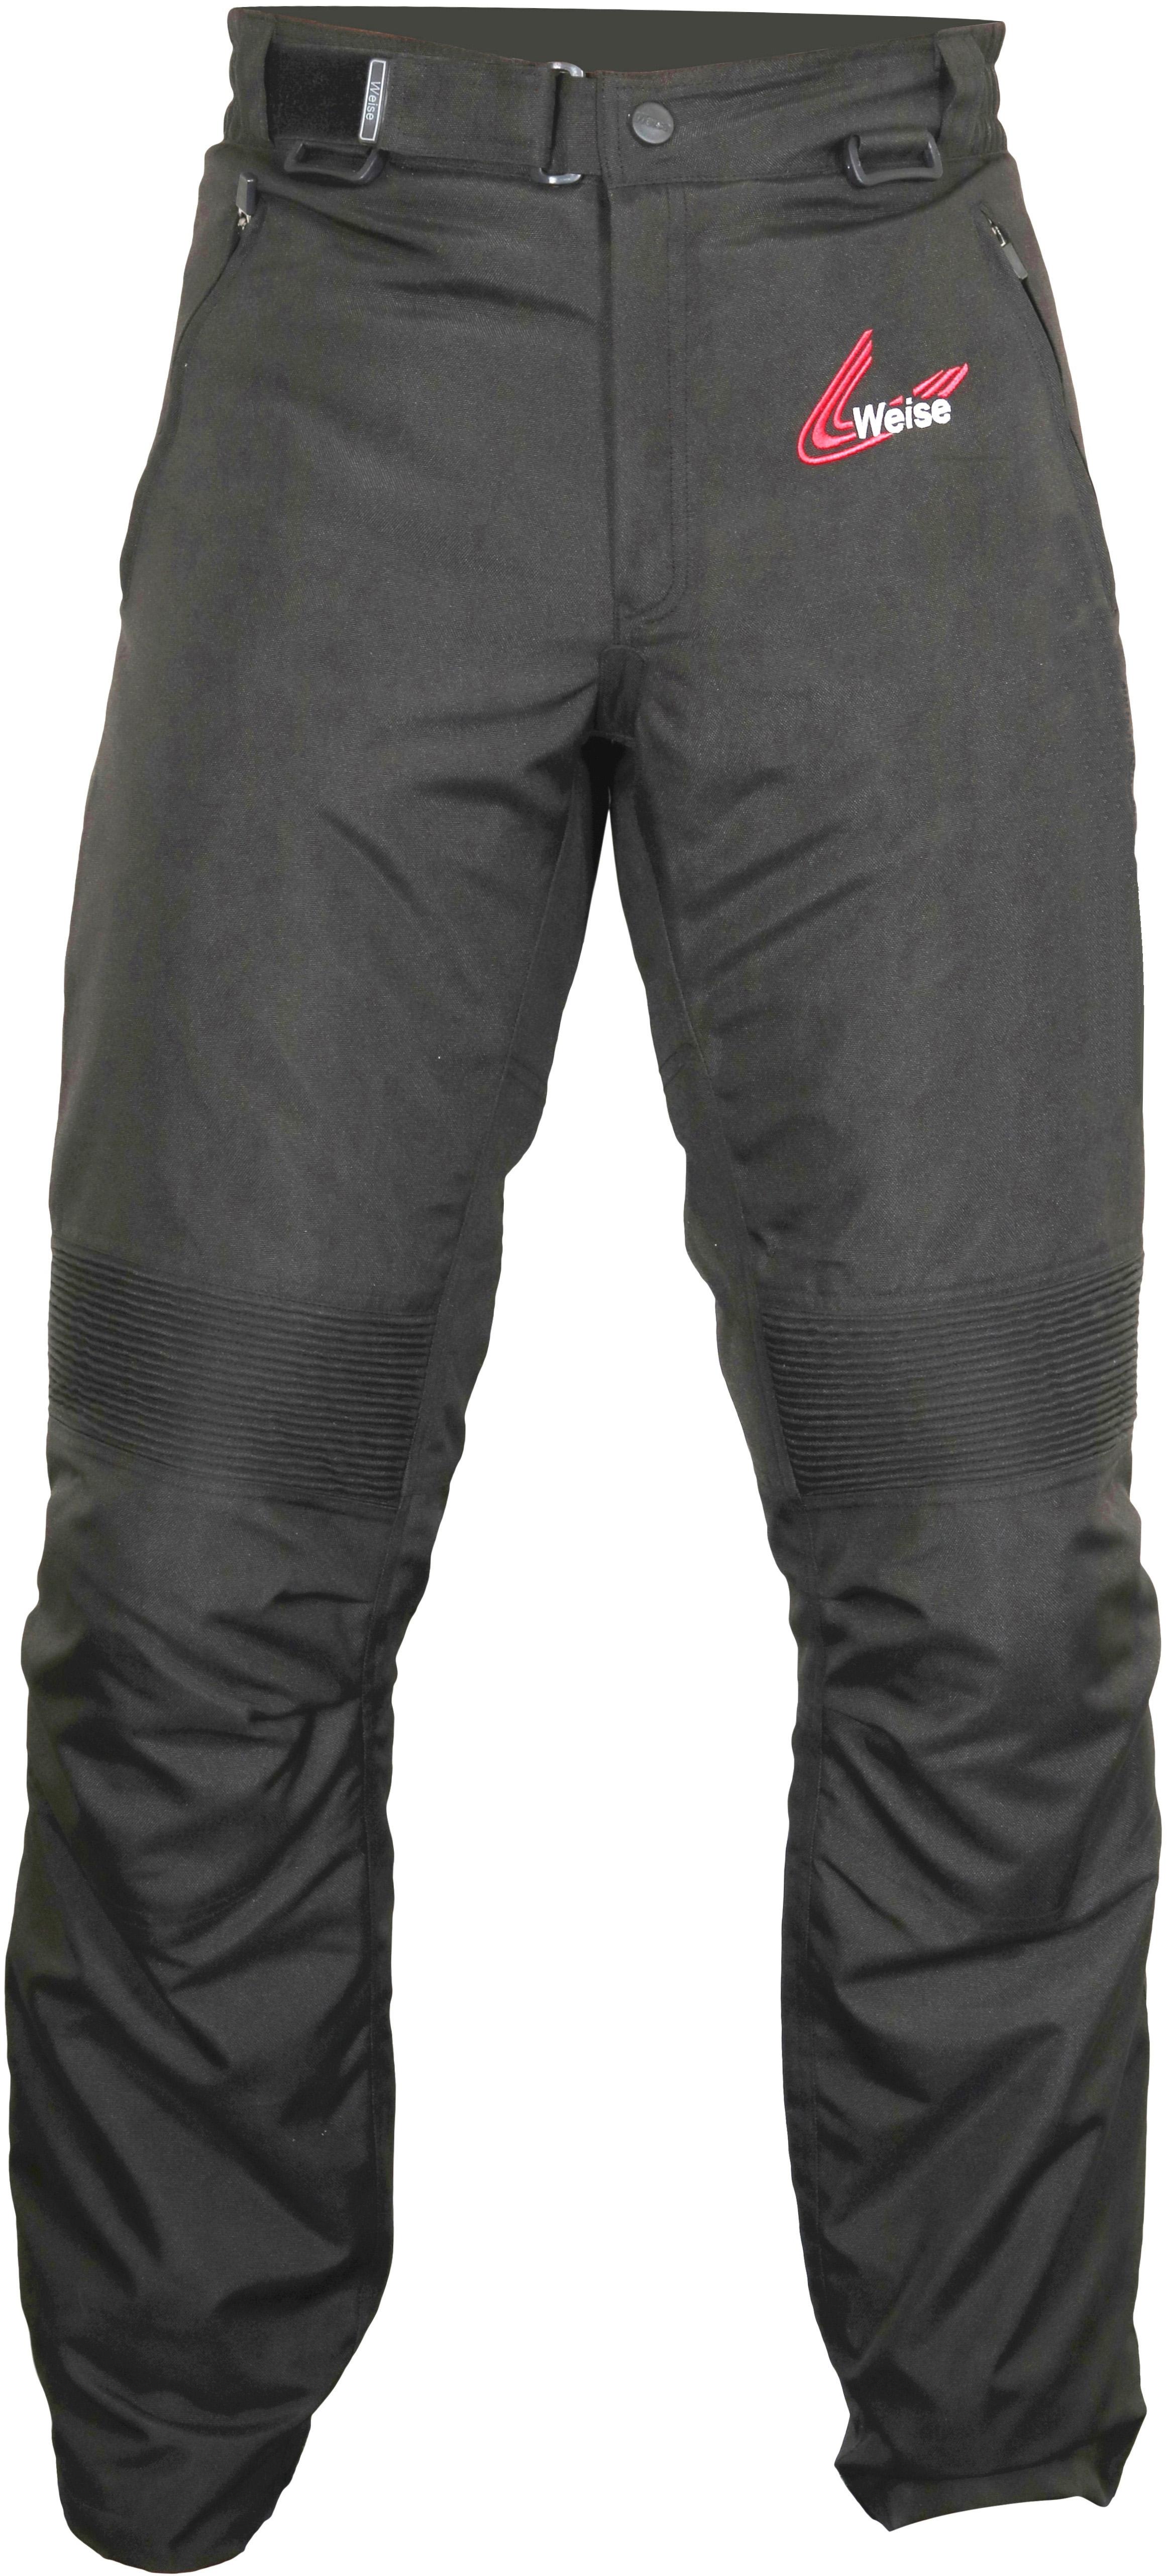 Weise Core Plus Motorcycle Jeans - Black, 2Xl